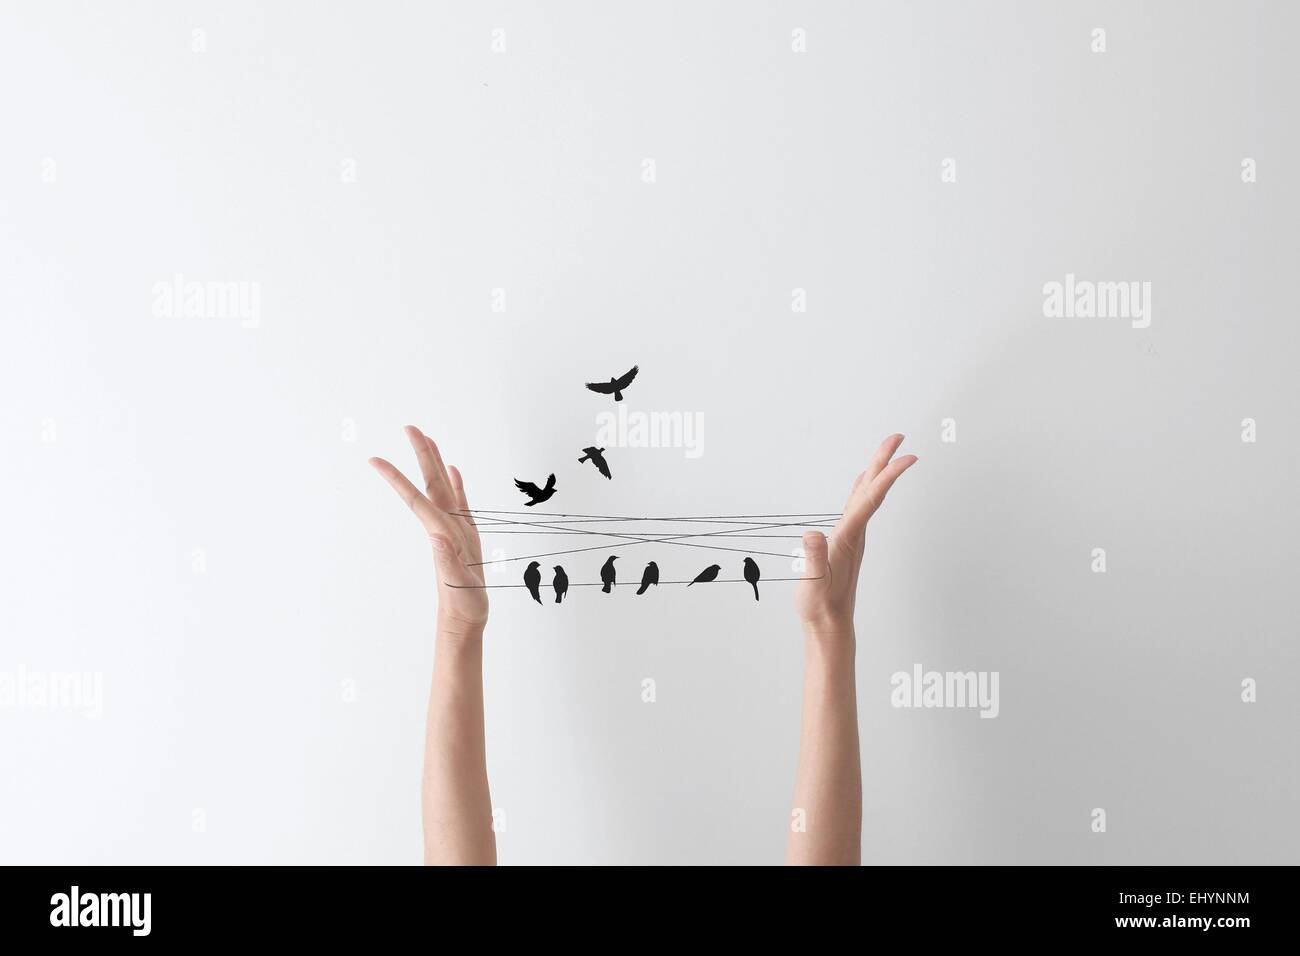 String hand game with birds perched on the string Stock Photo